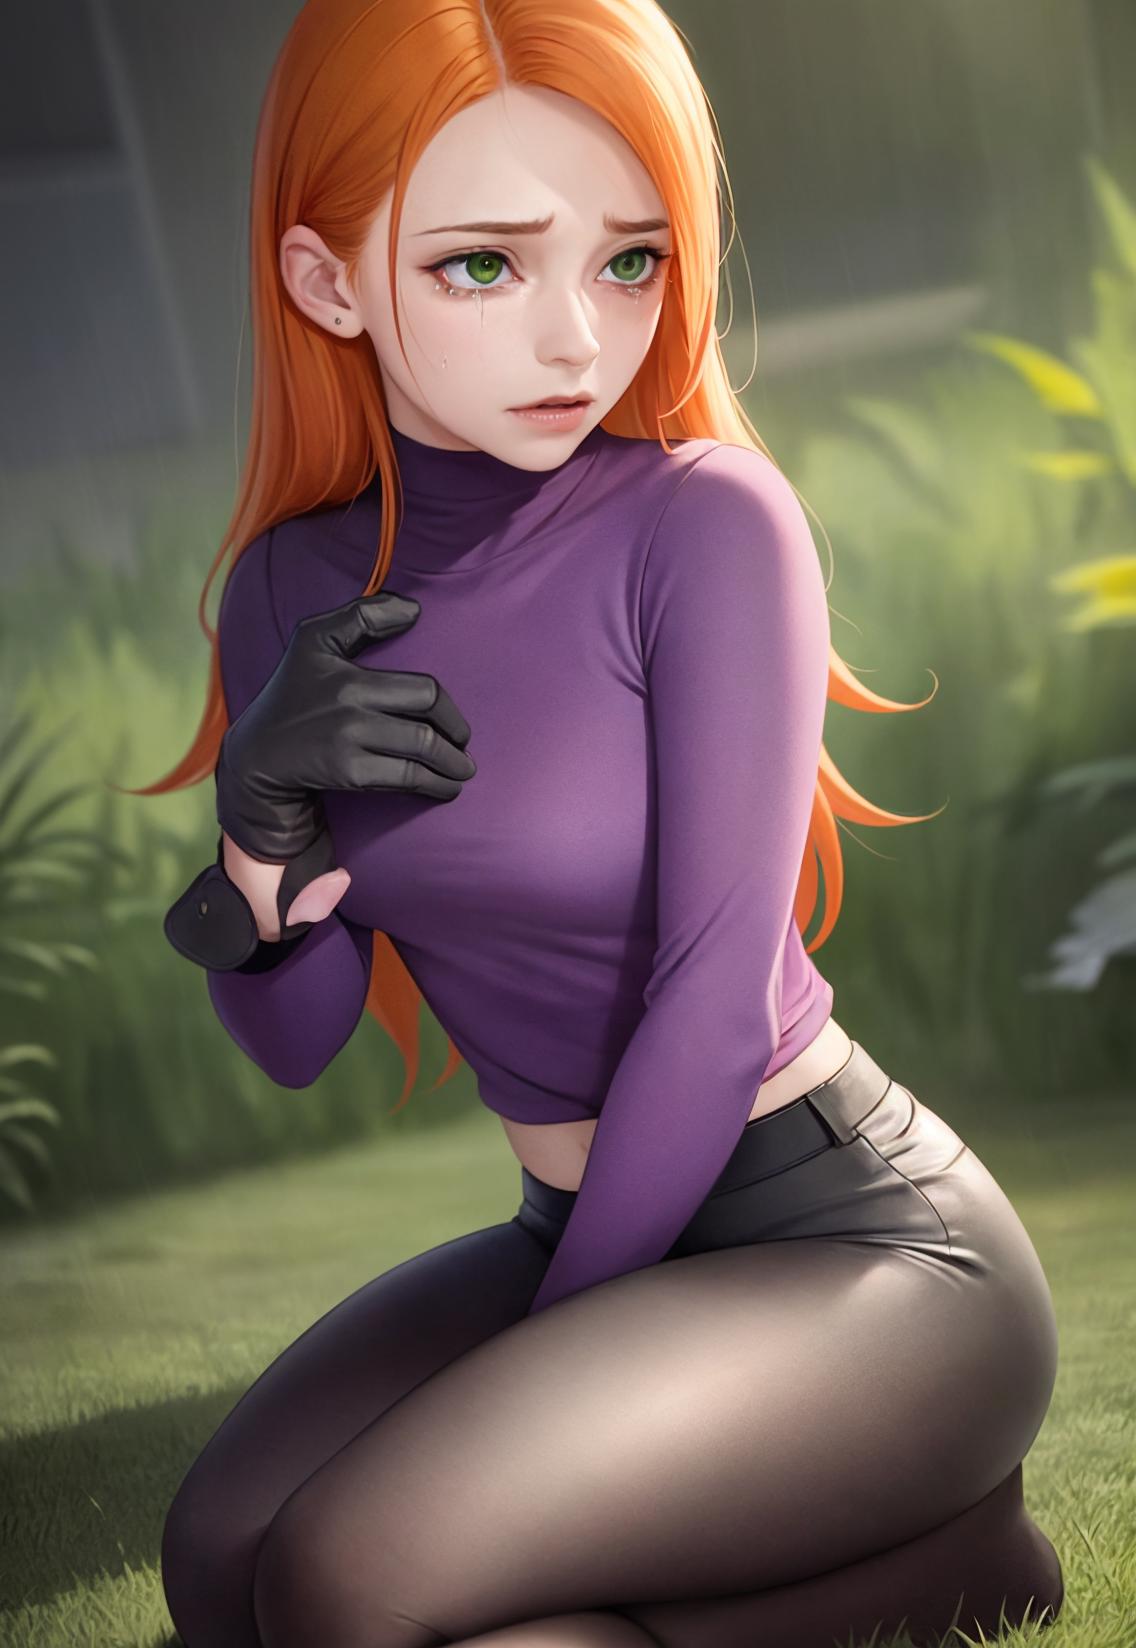 Kimberly Ann Possible - Kim Possible image by Nitram